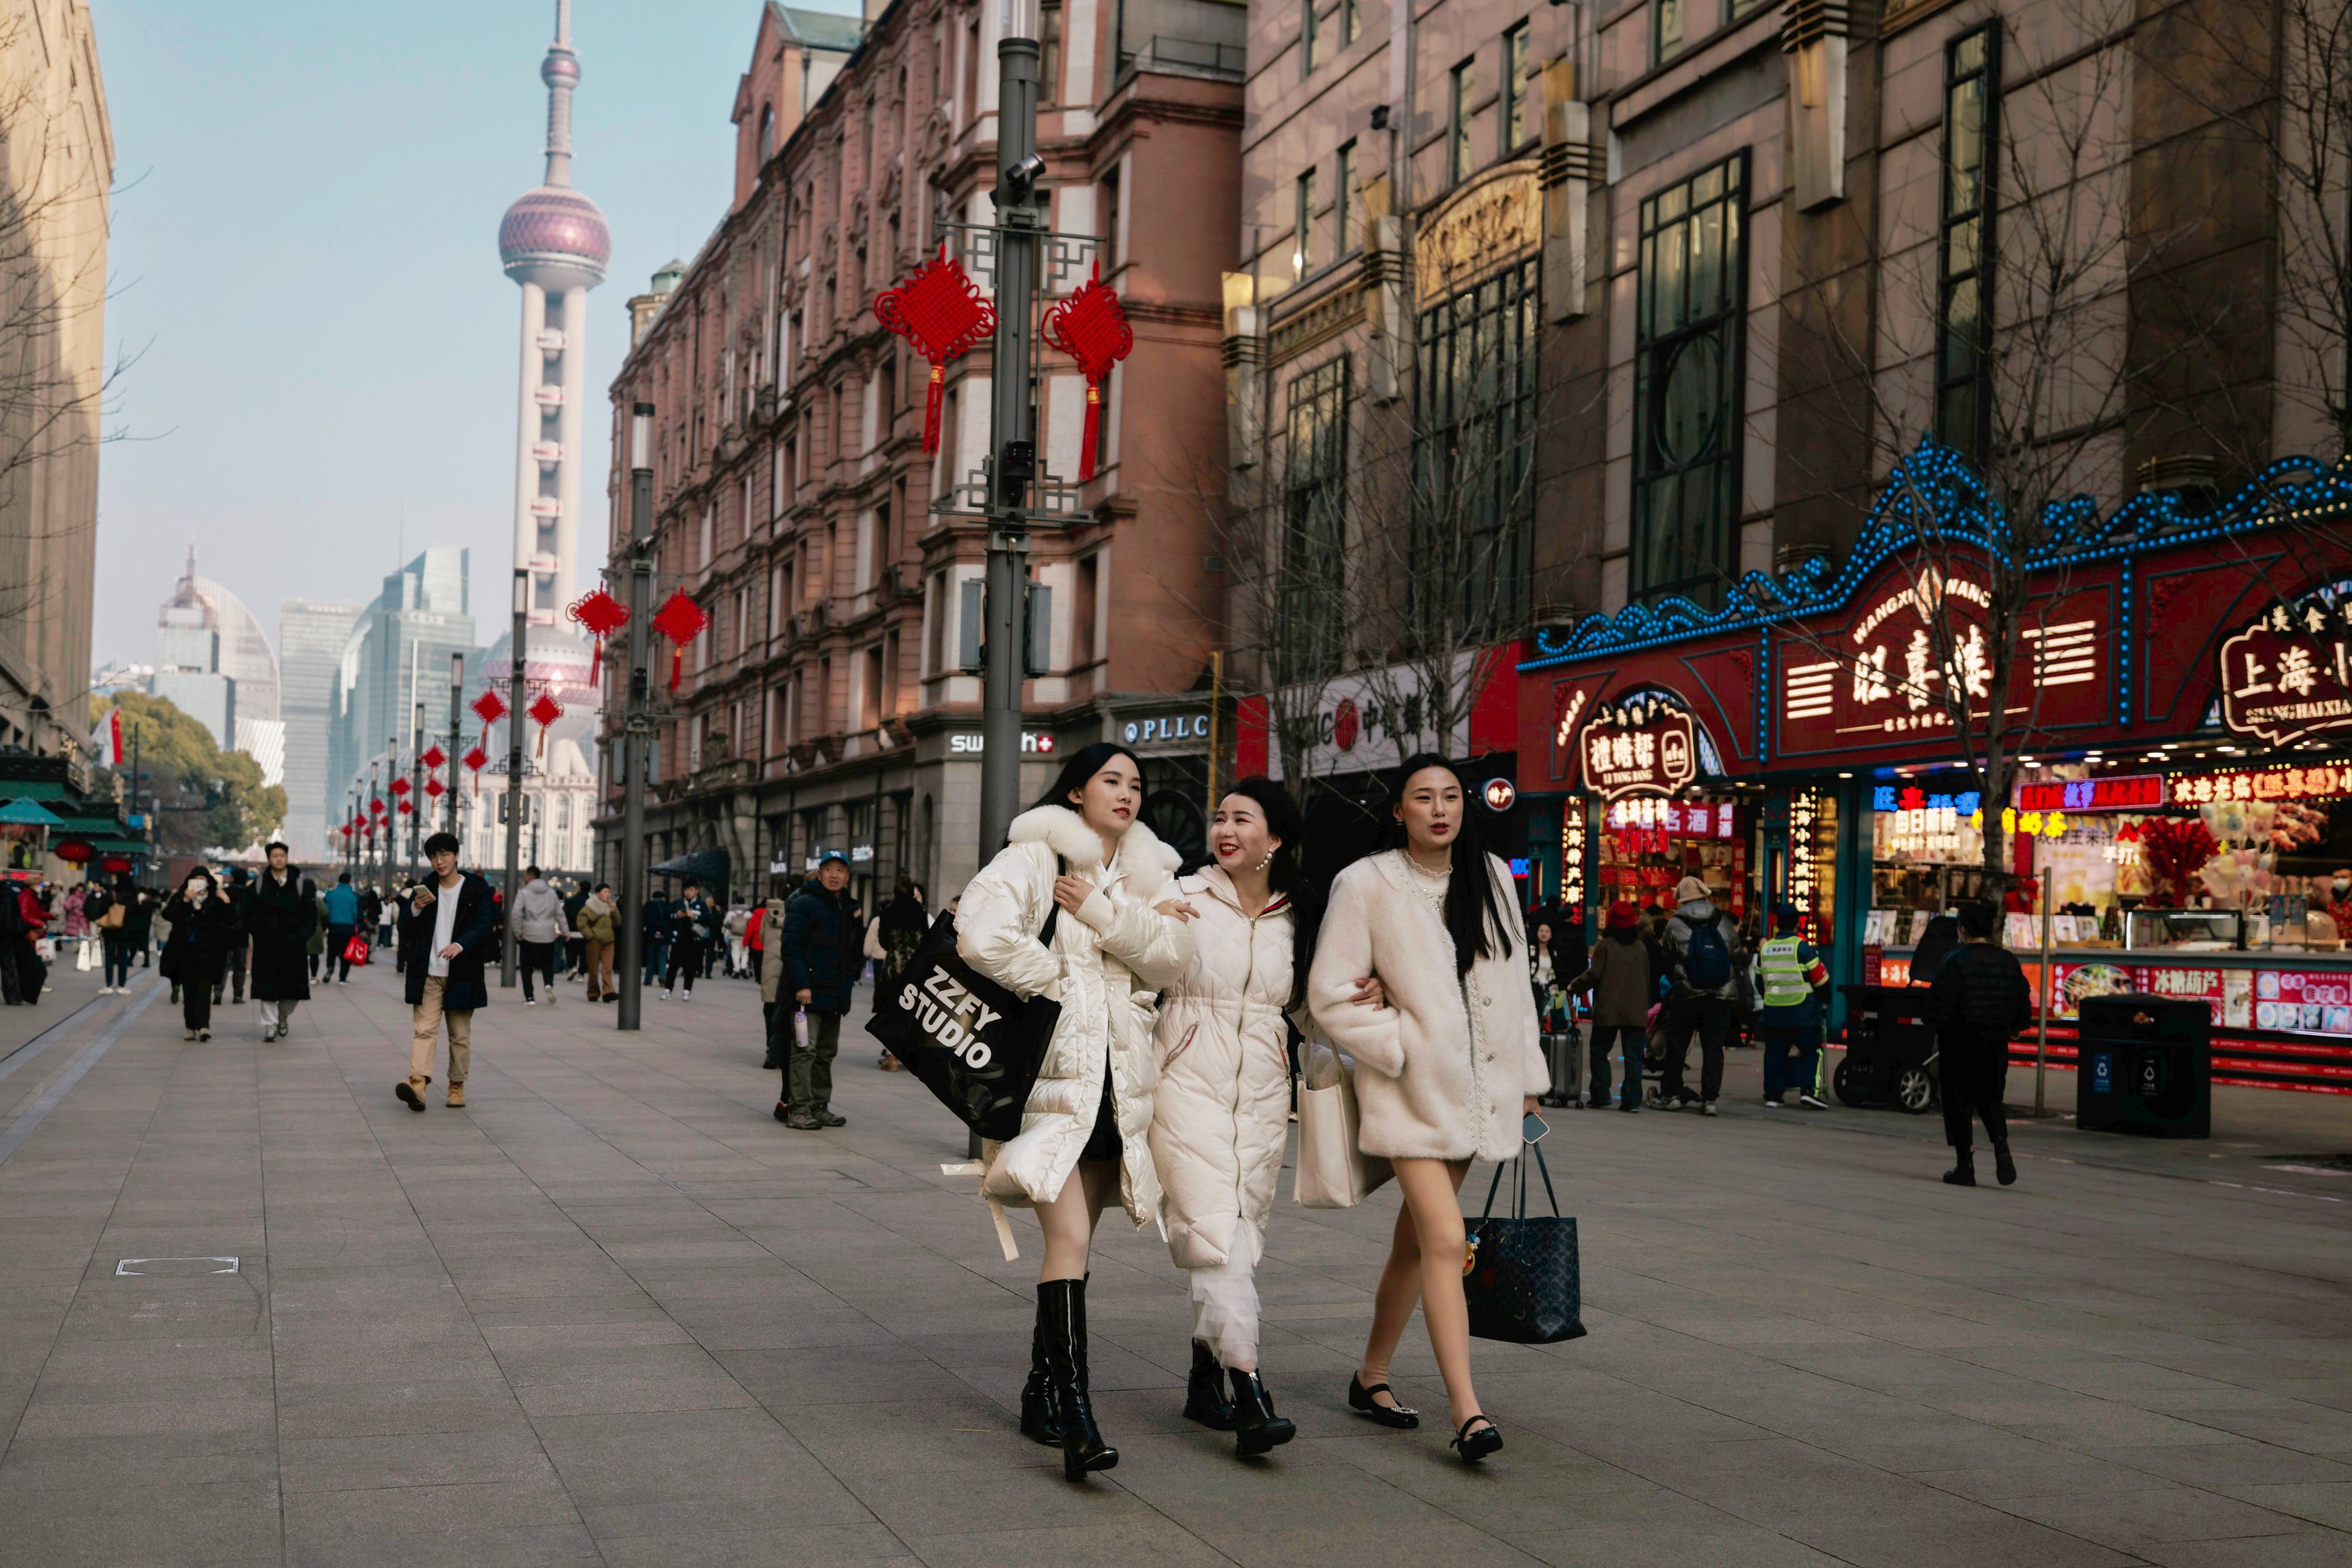 Nanjing Street, Shanghai’s main tourist and shopping street. Shanghai’s economic output expanded by 5 per cent last year, falling short of the 5.5 per cent goal the local ­government set at the beginning of 2023. Photo: EPA-EFE